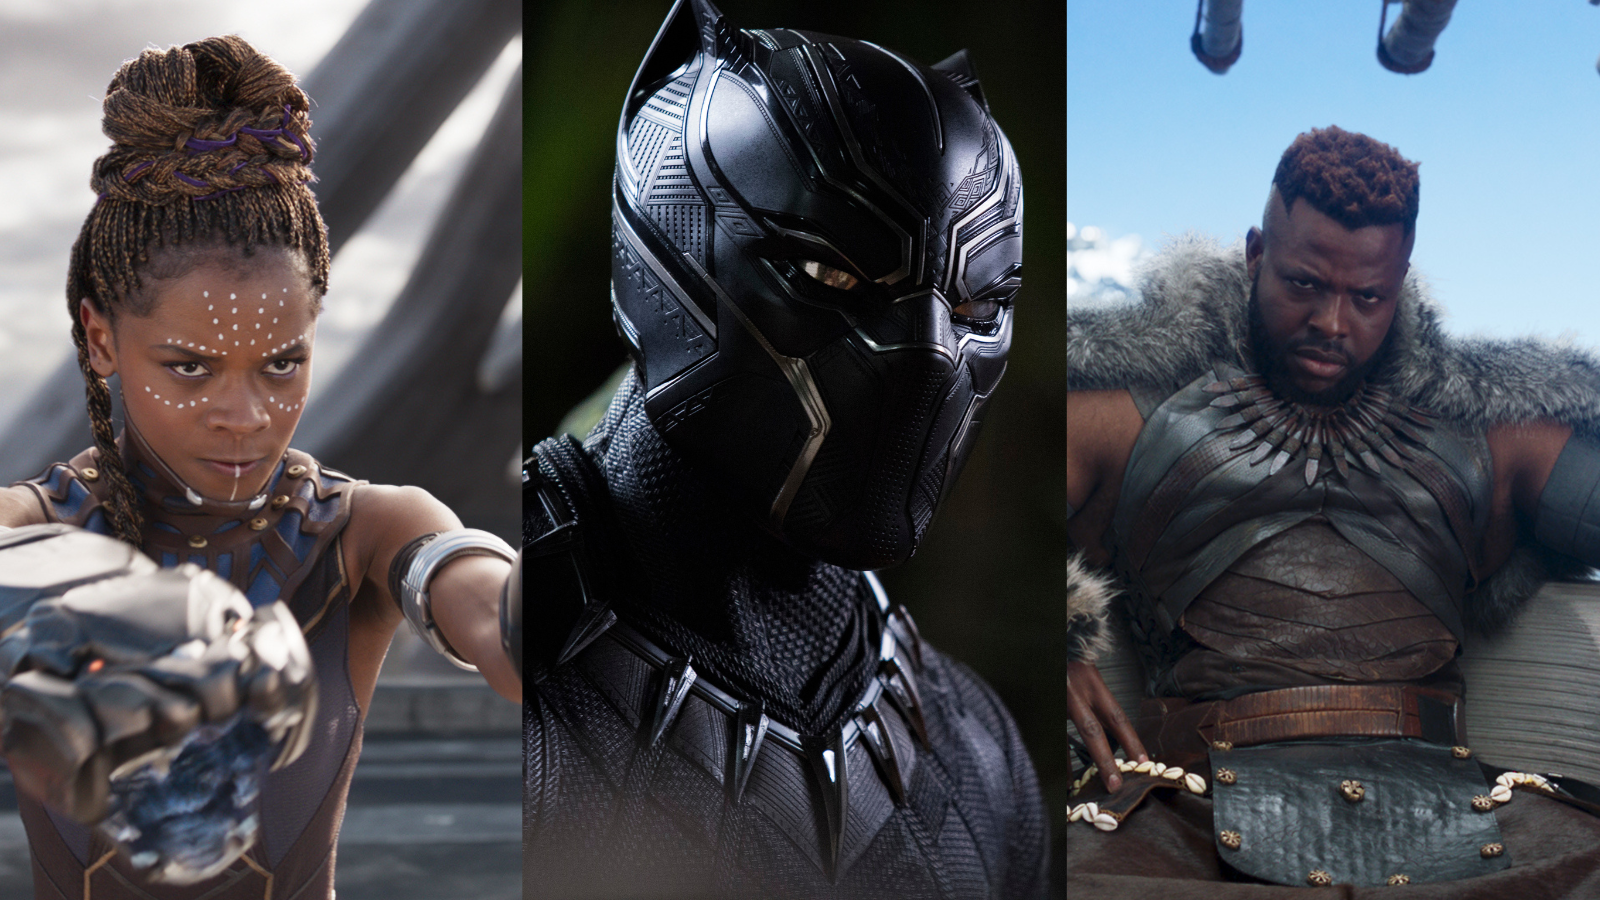 Black Panther Trailer: Marvel's latest TV spot reveals more about